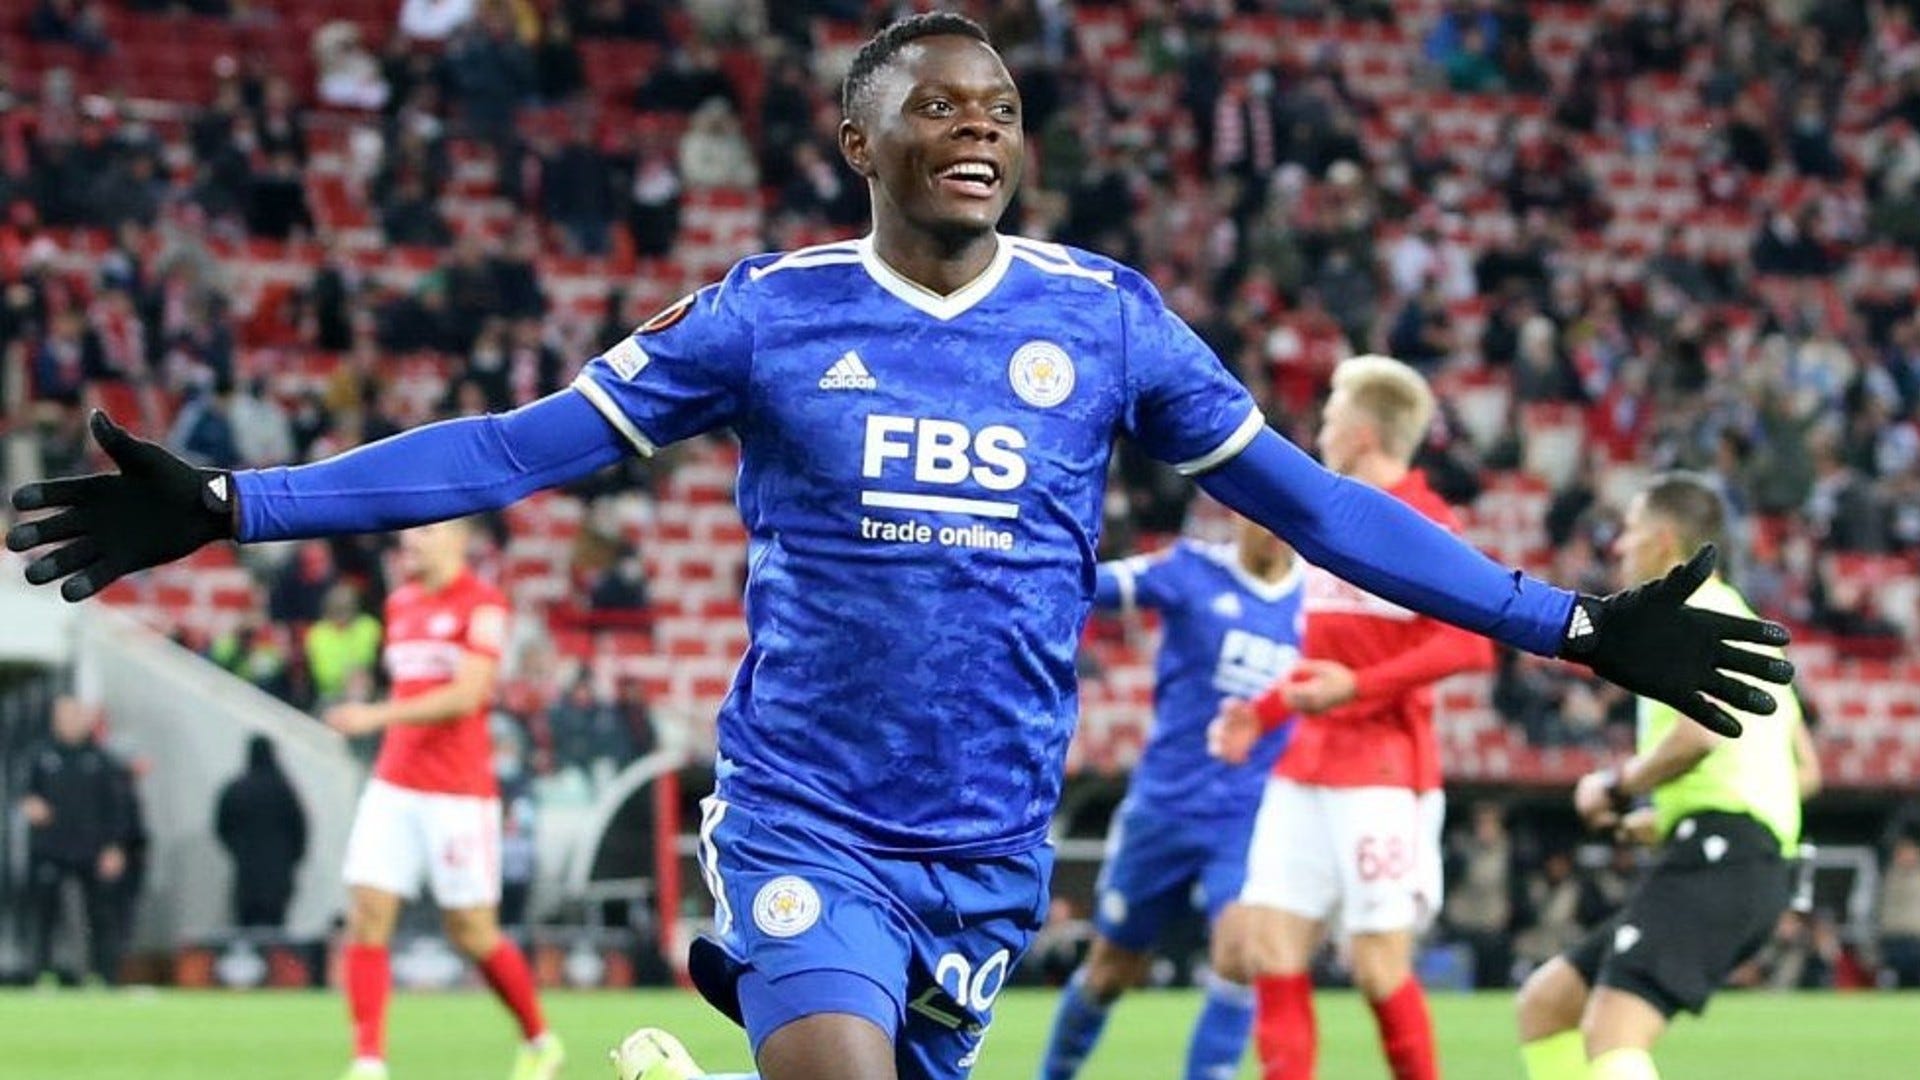  Patson Daka celebrates scoring a goal for Leicester City against Spartak Moscow, watched by teammates Jamie Vardy, Wilfred Ndidi, Kelechi Iheanacho, and Jannik Vestergaard.